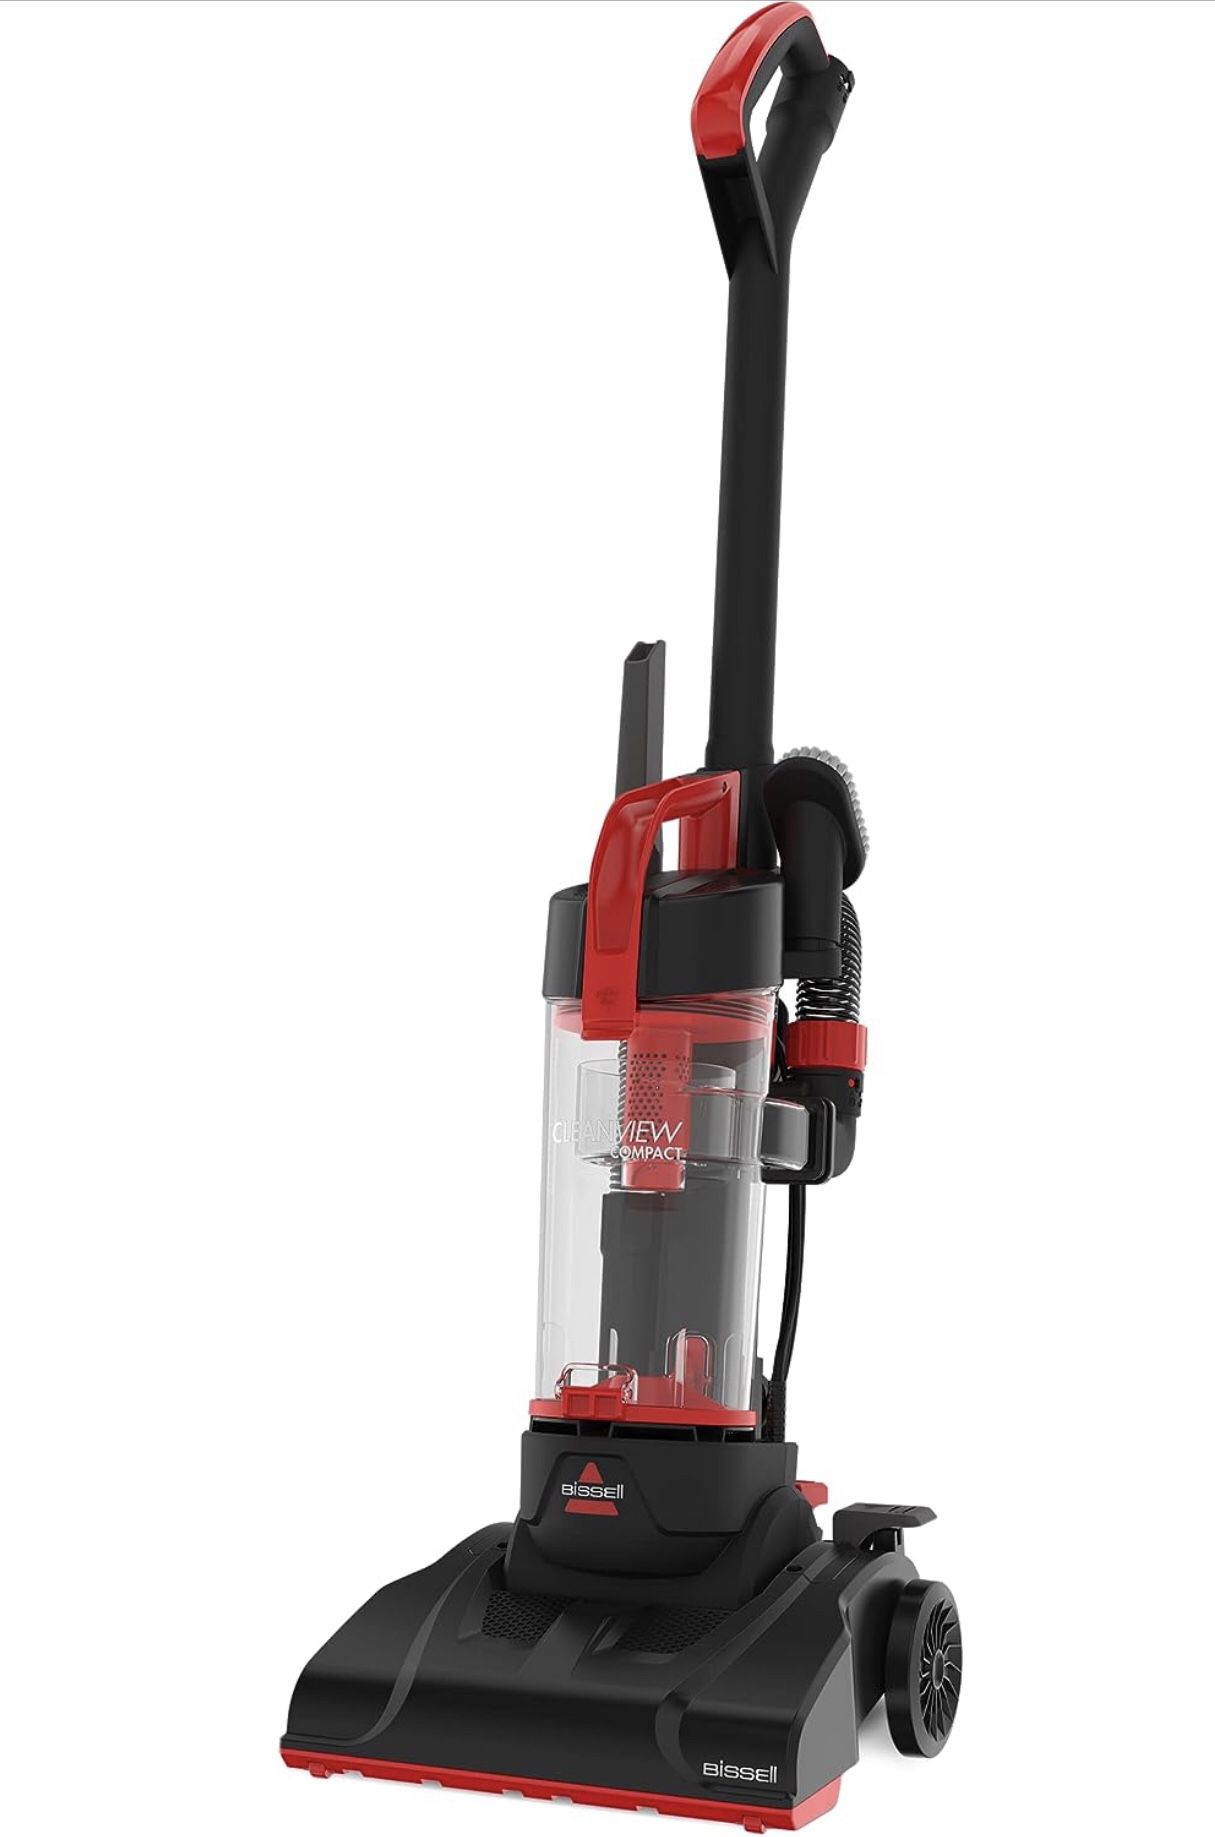 BISSELL CleanView Compact Upright Vacuum, Fits In Dorm Rooms & Apartments, Lightweight with Powerful Suction and Removable Extension Wand, 3508, Red,b